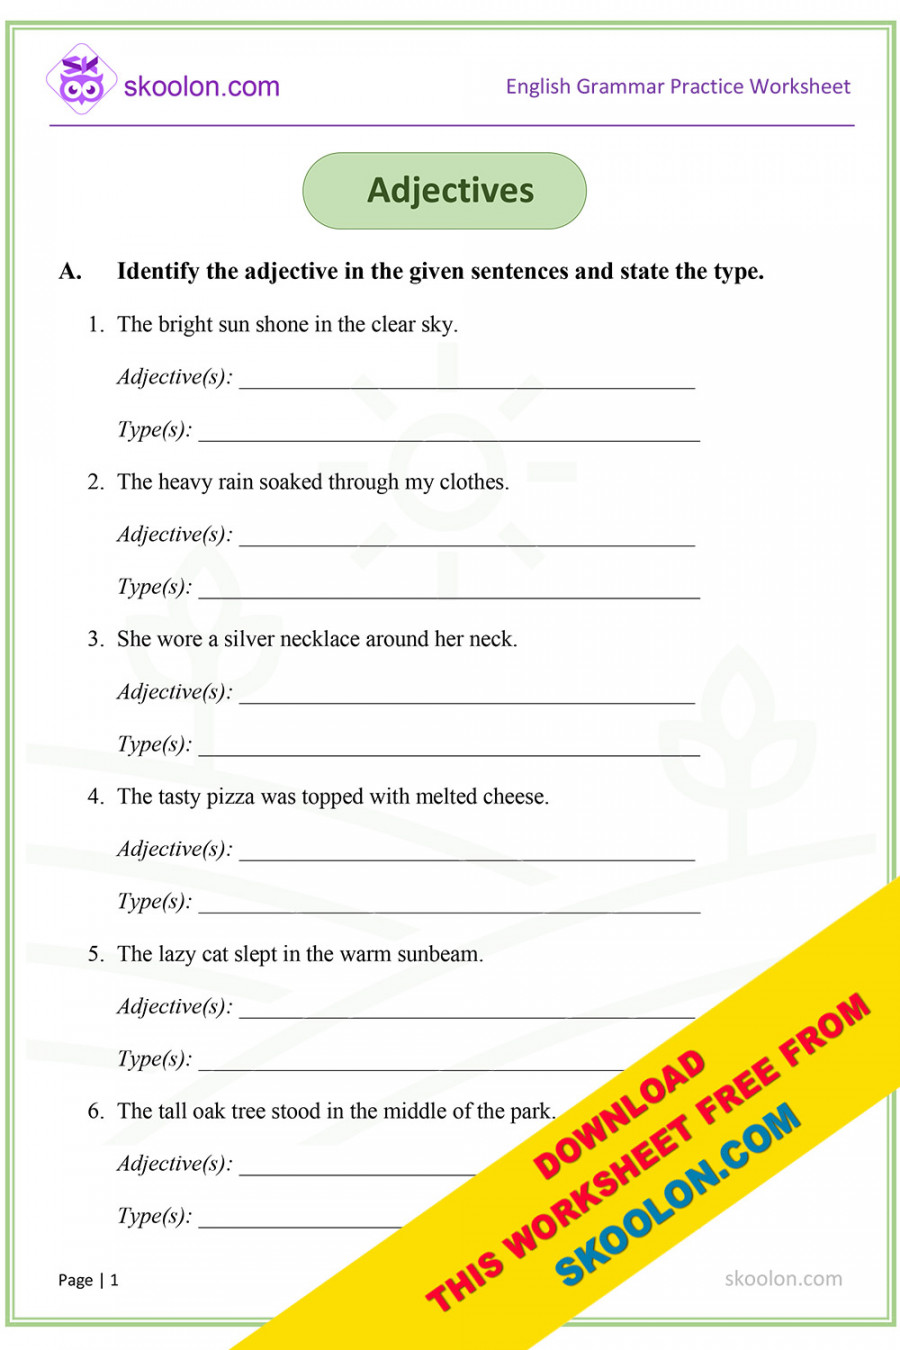 Adjectives with Answers- - skoolon